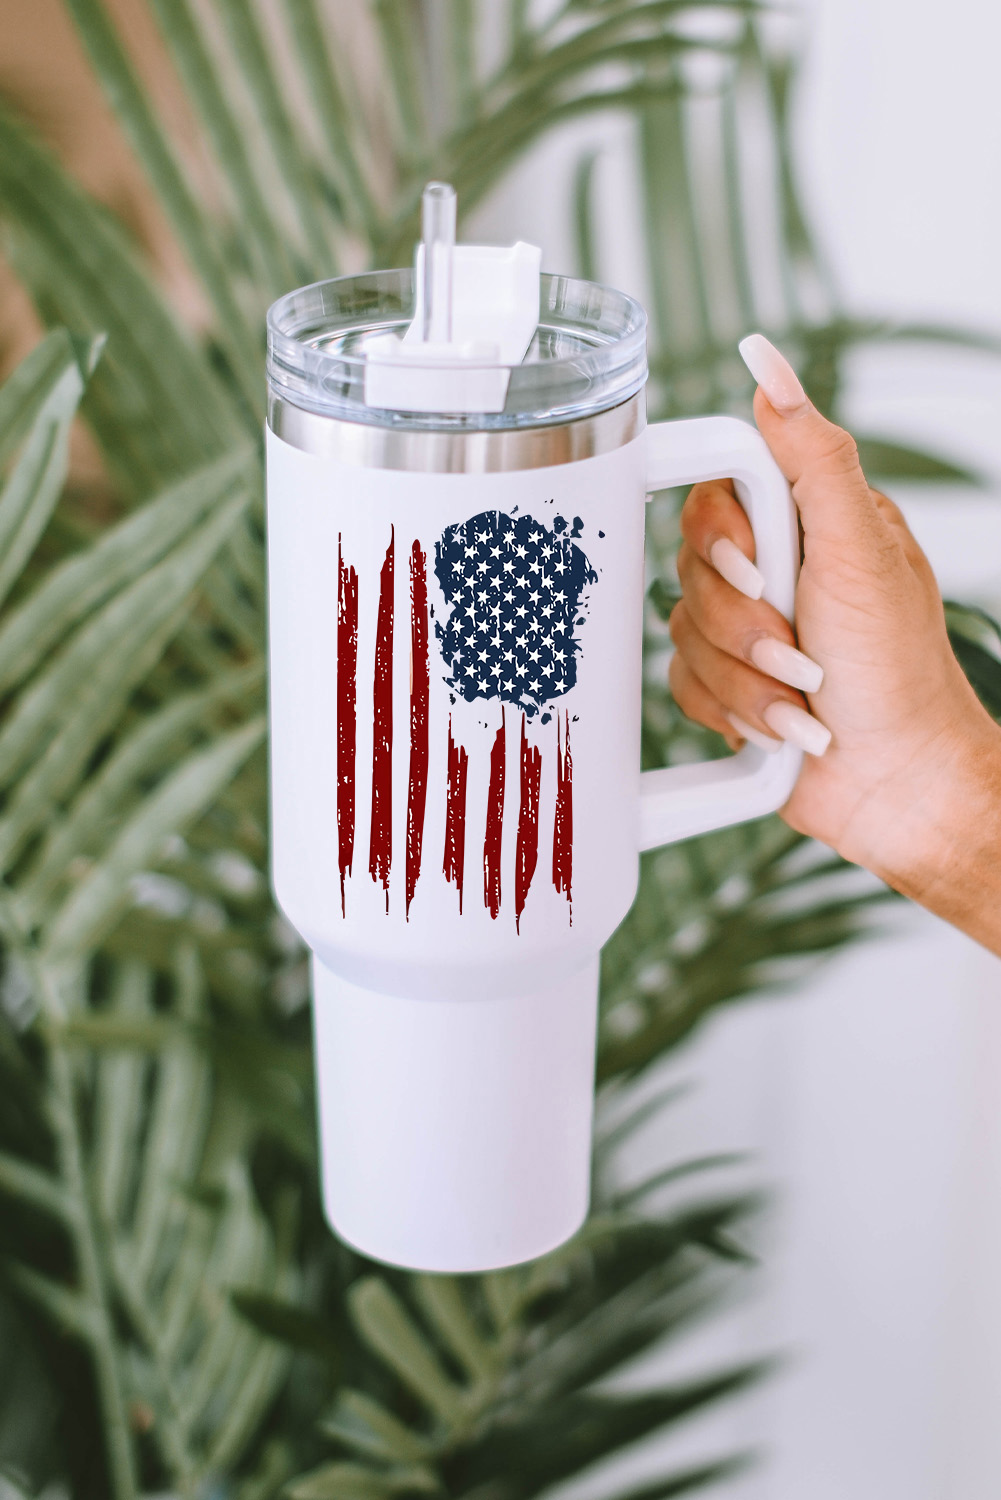 Shewin Wholesale Western Apparel White American Flag Print Stainless Steel Portable Tumbler MUG with